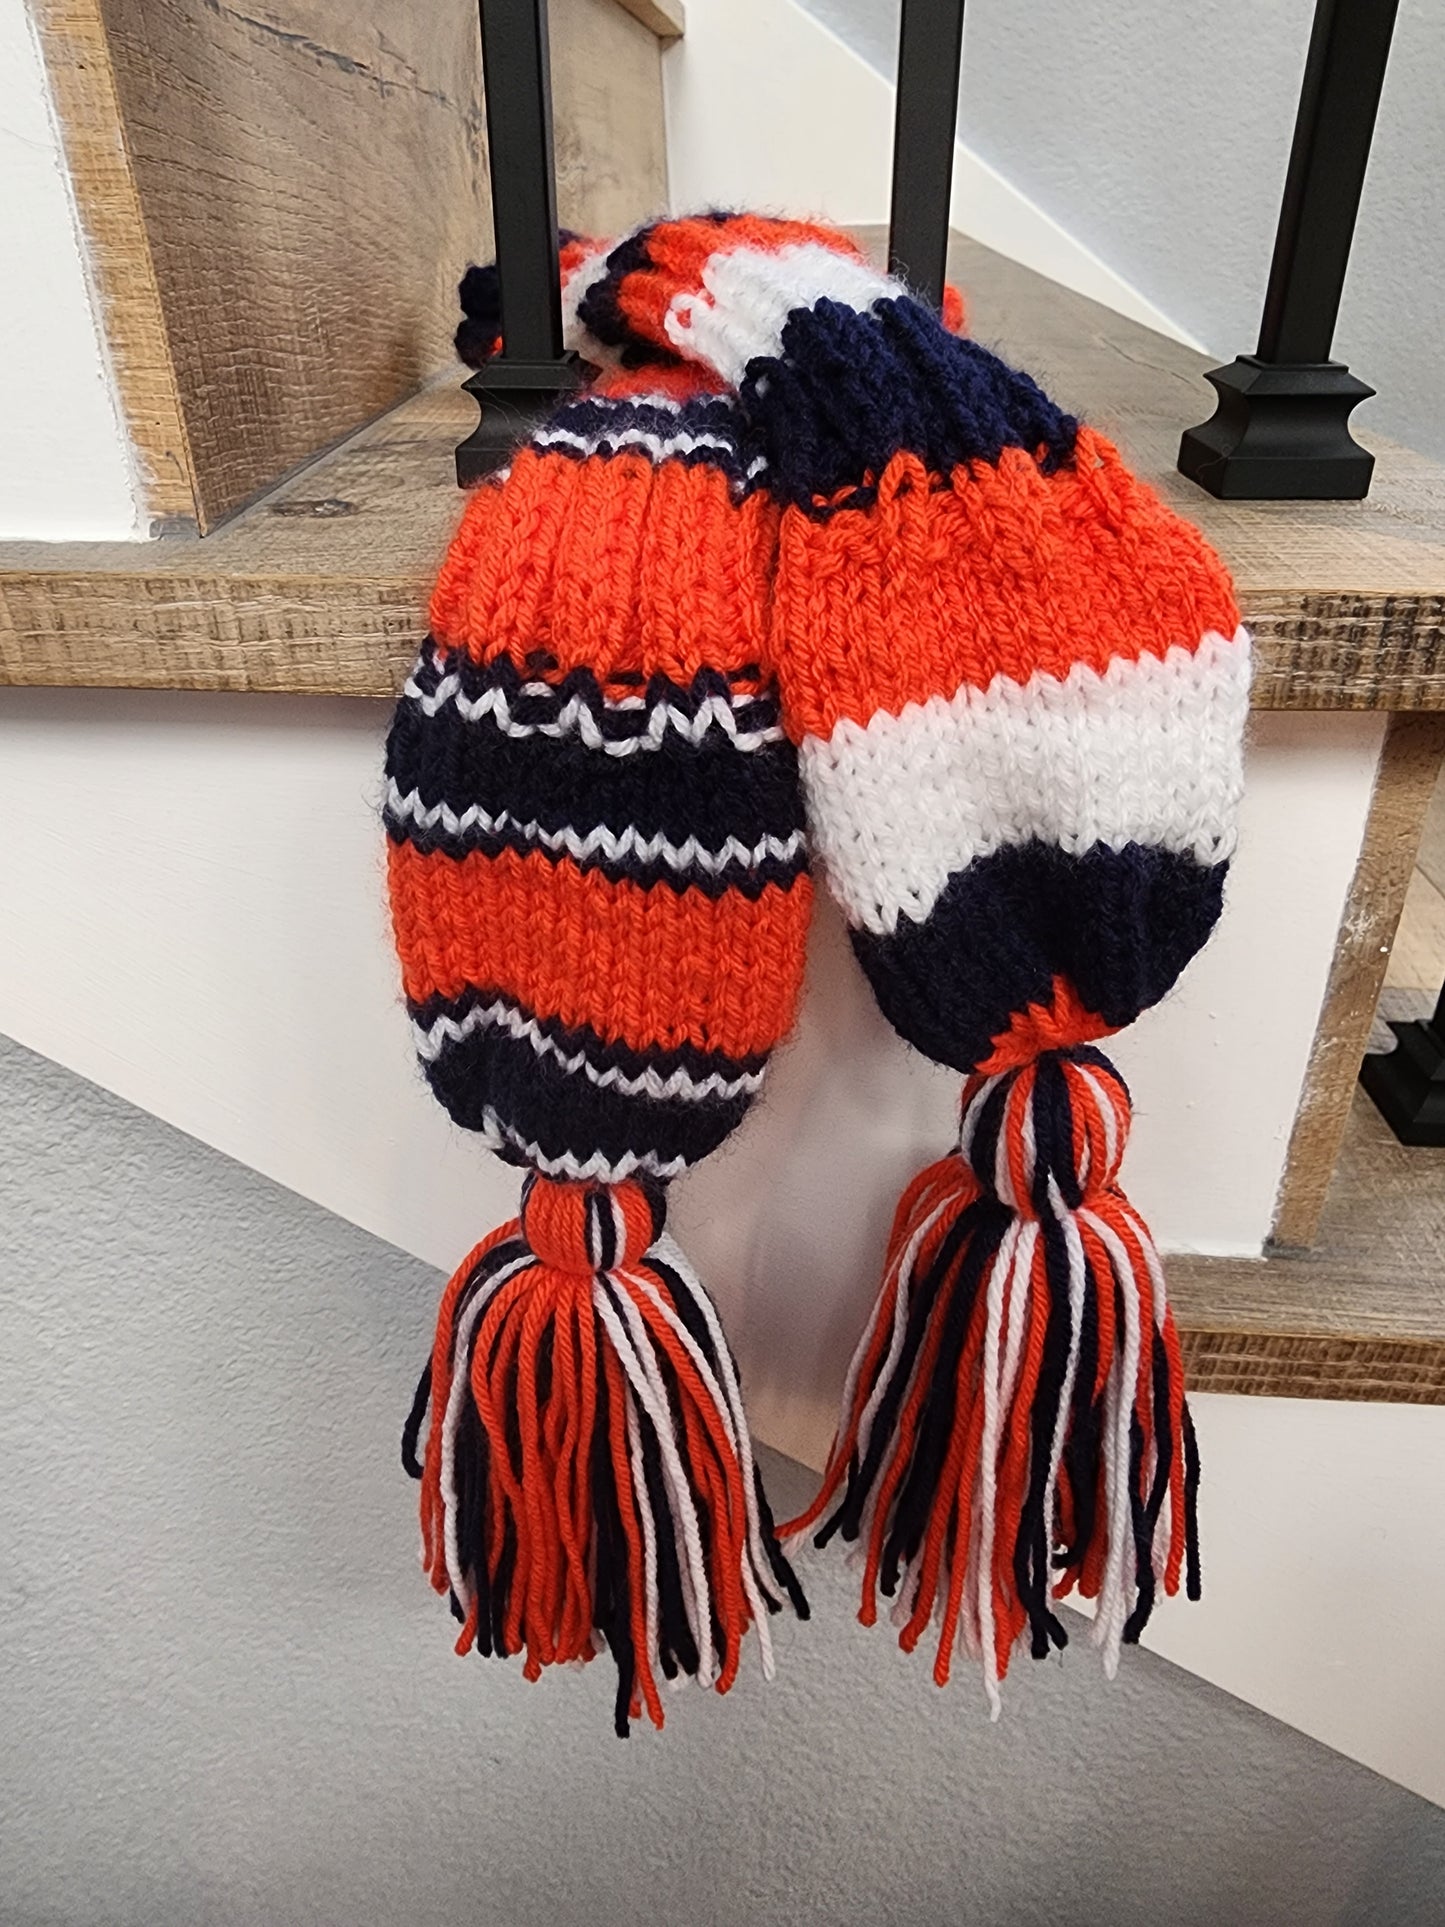 Two Golf Club Head Covers Retro-Vintage Navy, Orange & White with Tassels for Fairway Woods - Austinknittylimits